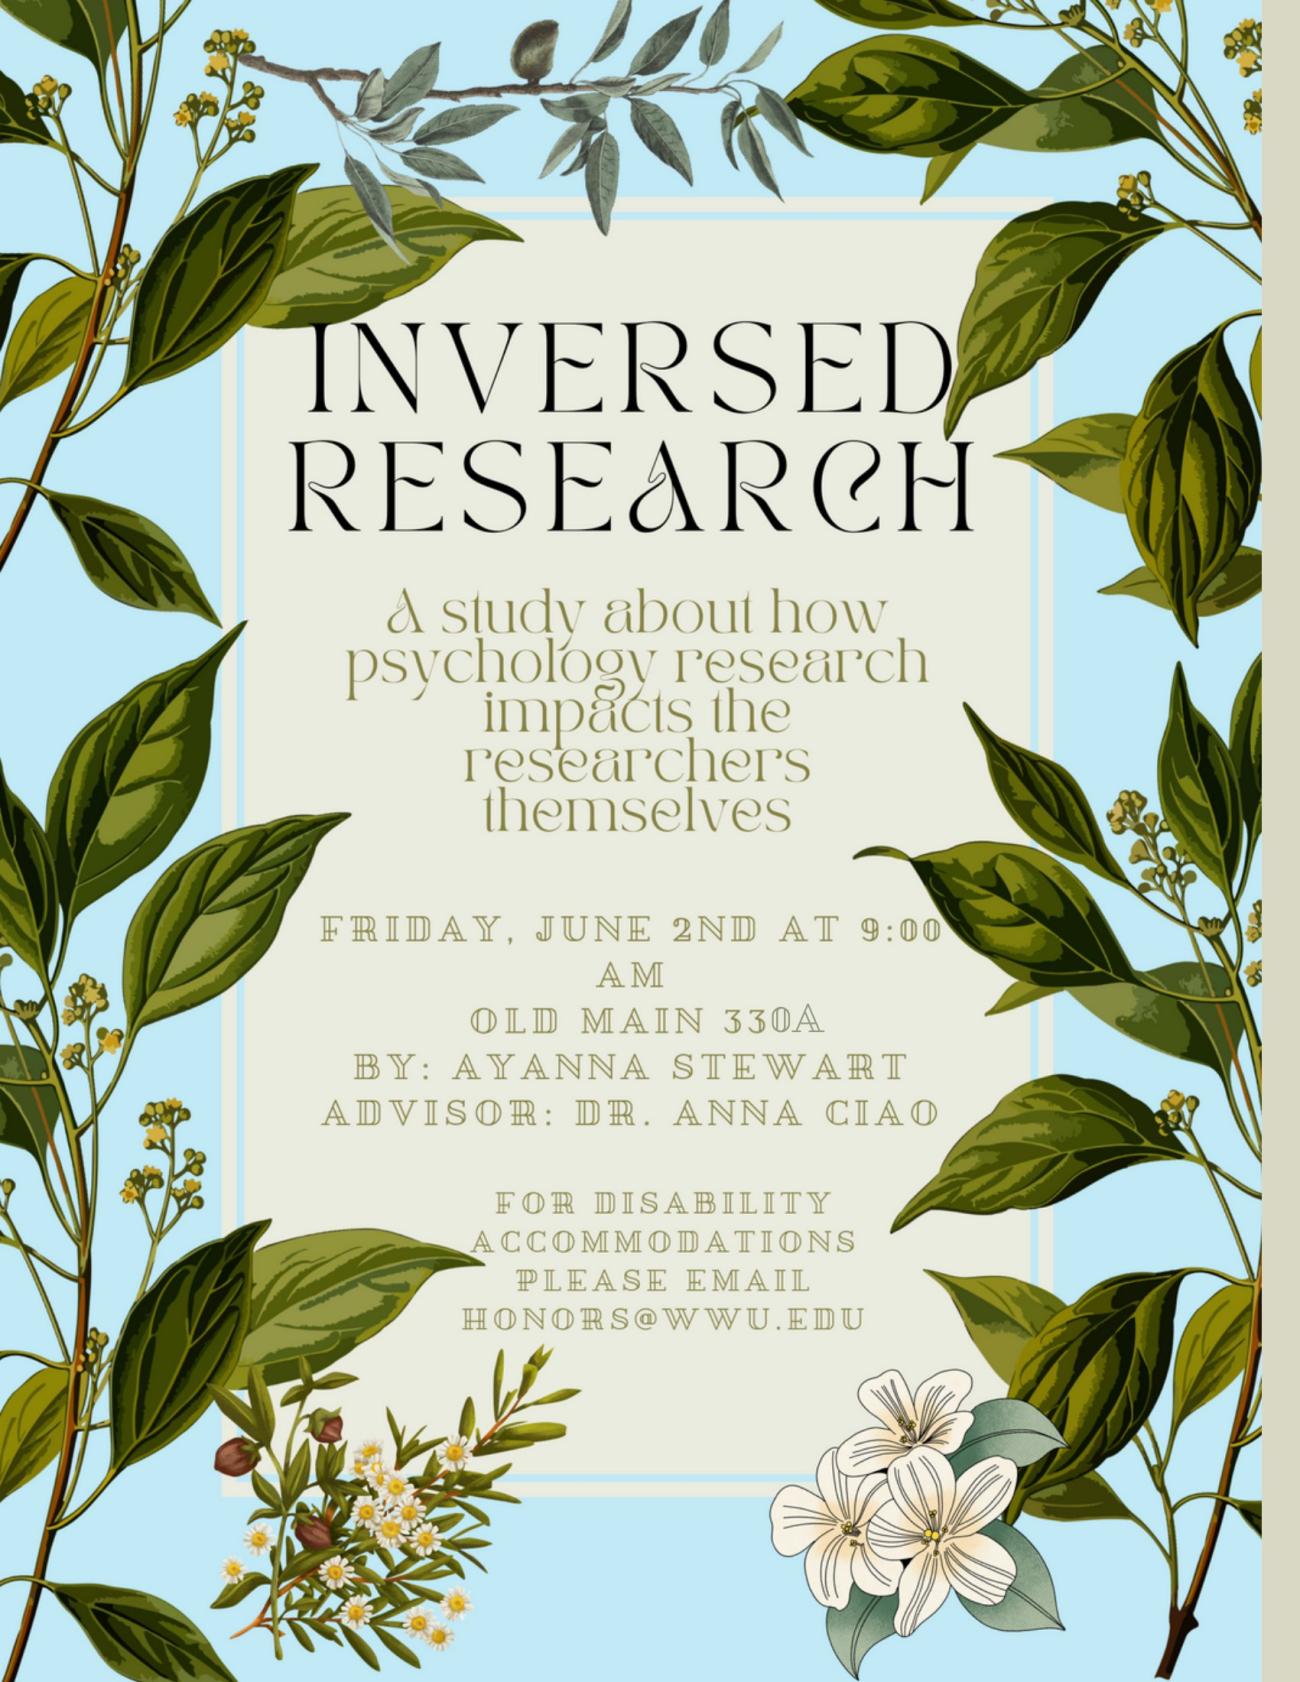 A poster with a light blue background and green leaves surrounding the border of the poster. Text reads: "Inversed Research. A study about how psychology research impacts the researchers themselves. Friday, June 2nd at 9:00 am in Old Main 330A. By: Ayanna Stewart, advisor: Dr. Anna Ciao. For disability accommodations please email honors@wwu.edu."